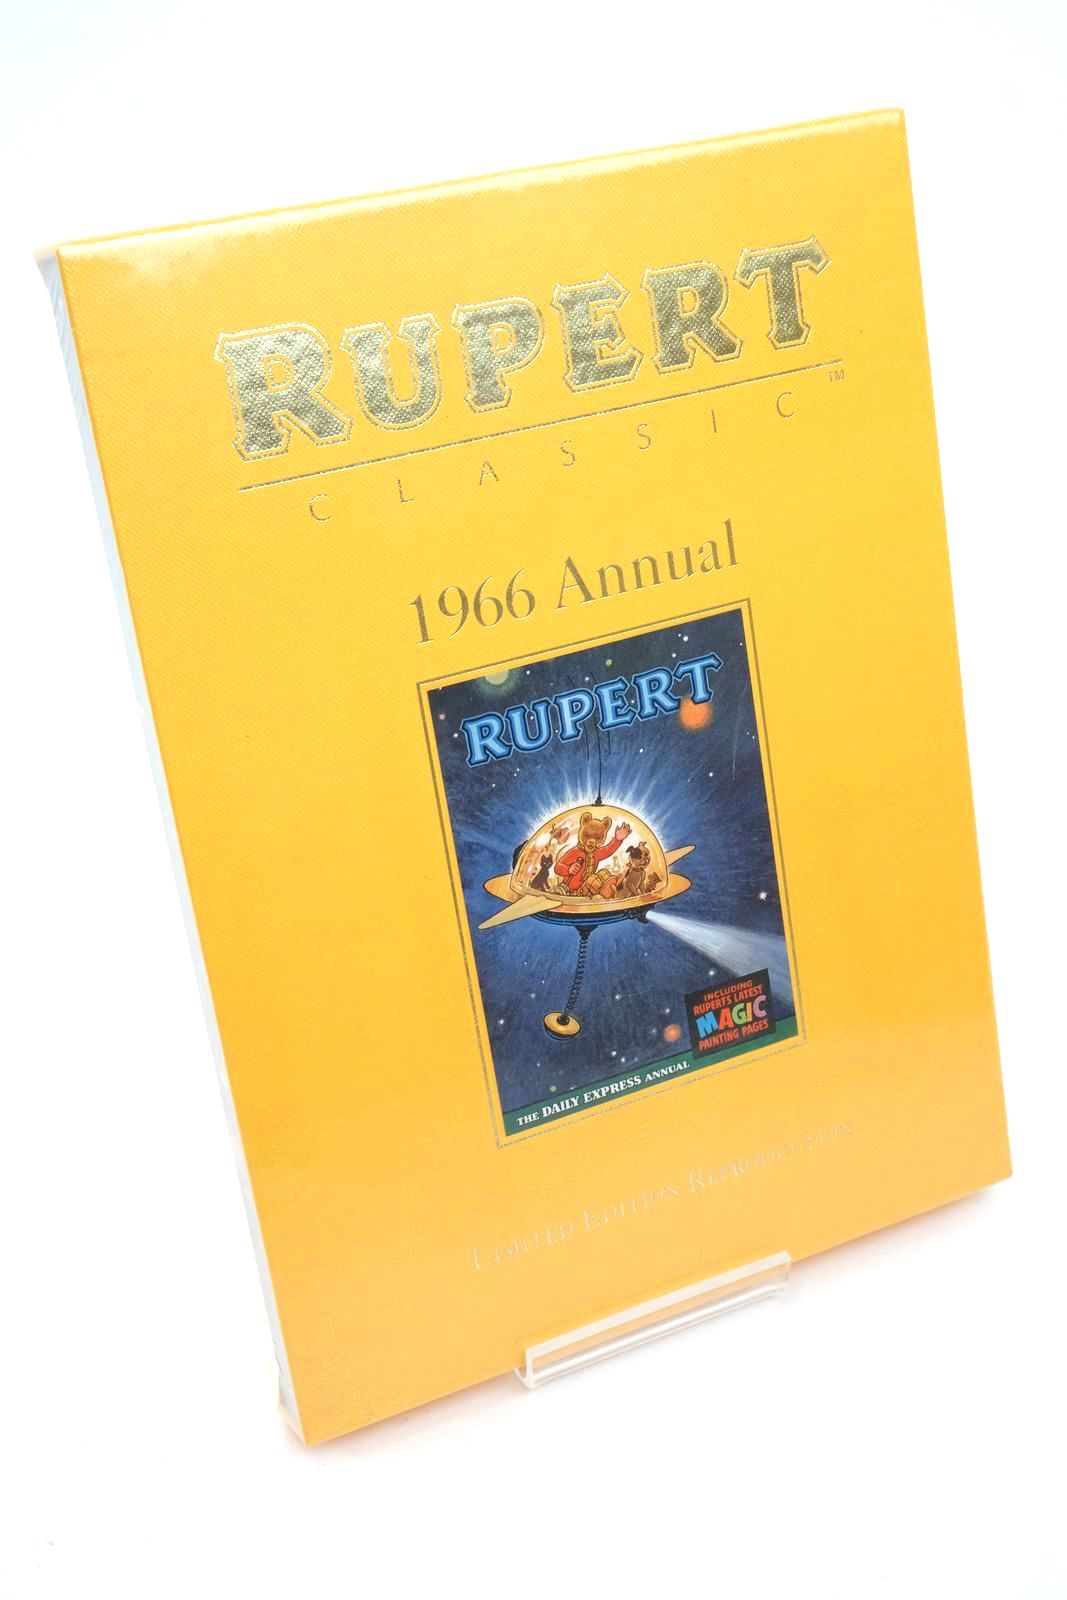 Photo of RUPERT ANNUAL 1966 (FACSIMILE) written by Bestall, Alfred illustrated by Bestall, Alfred published by Egmont Children's Books Ltd. (STOCK CODE: 1322865)  for sale by Stella & Rose's Books